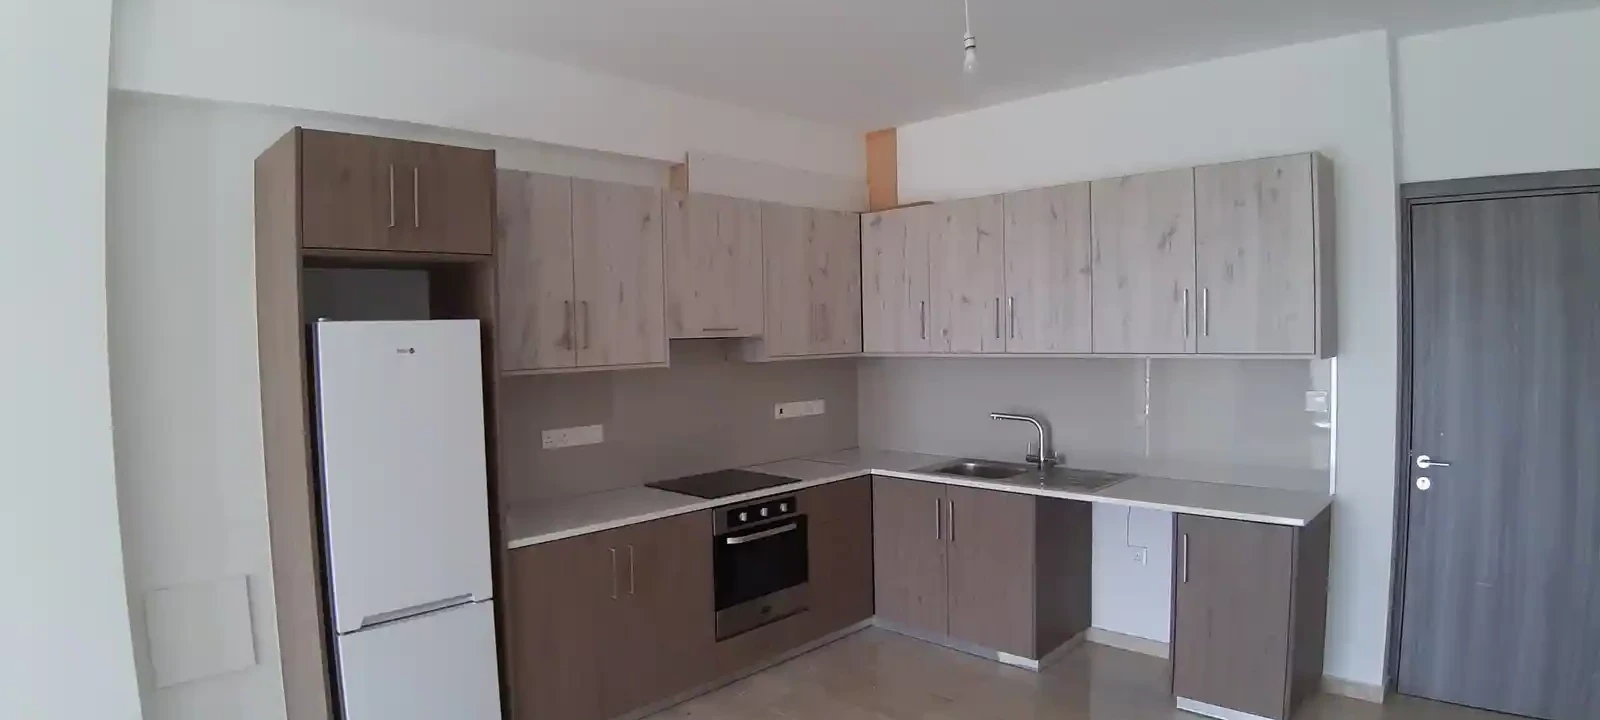 2-bedroom apartment to rent €1.250, image 1